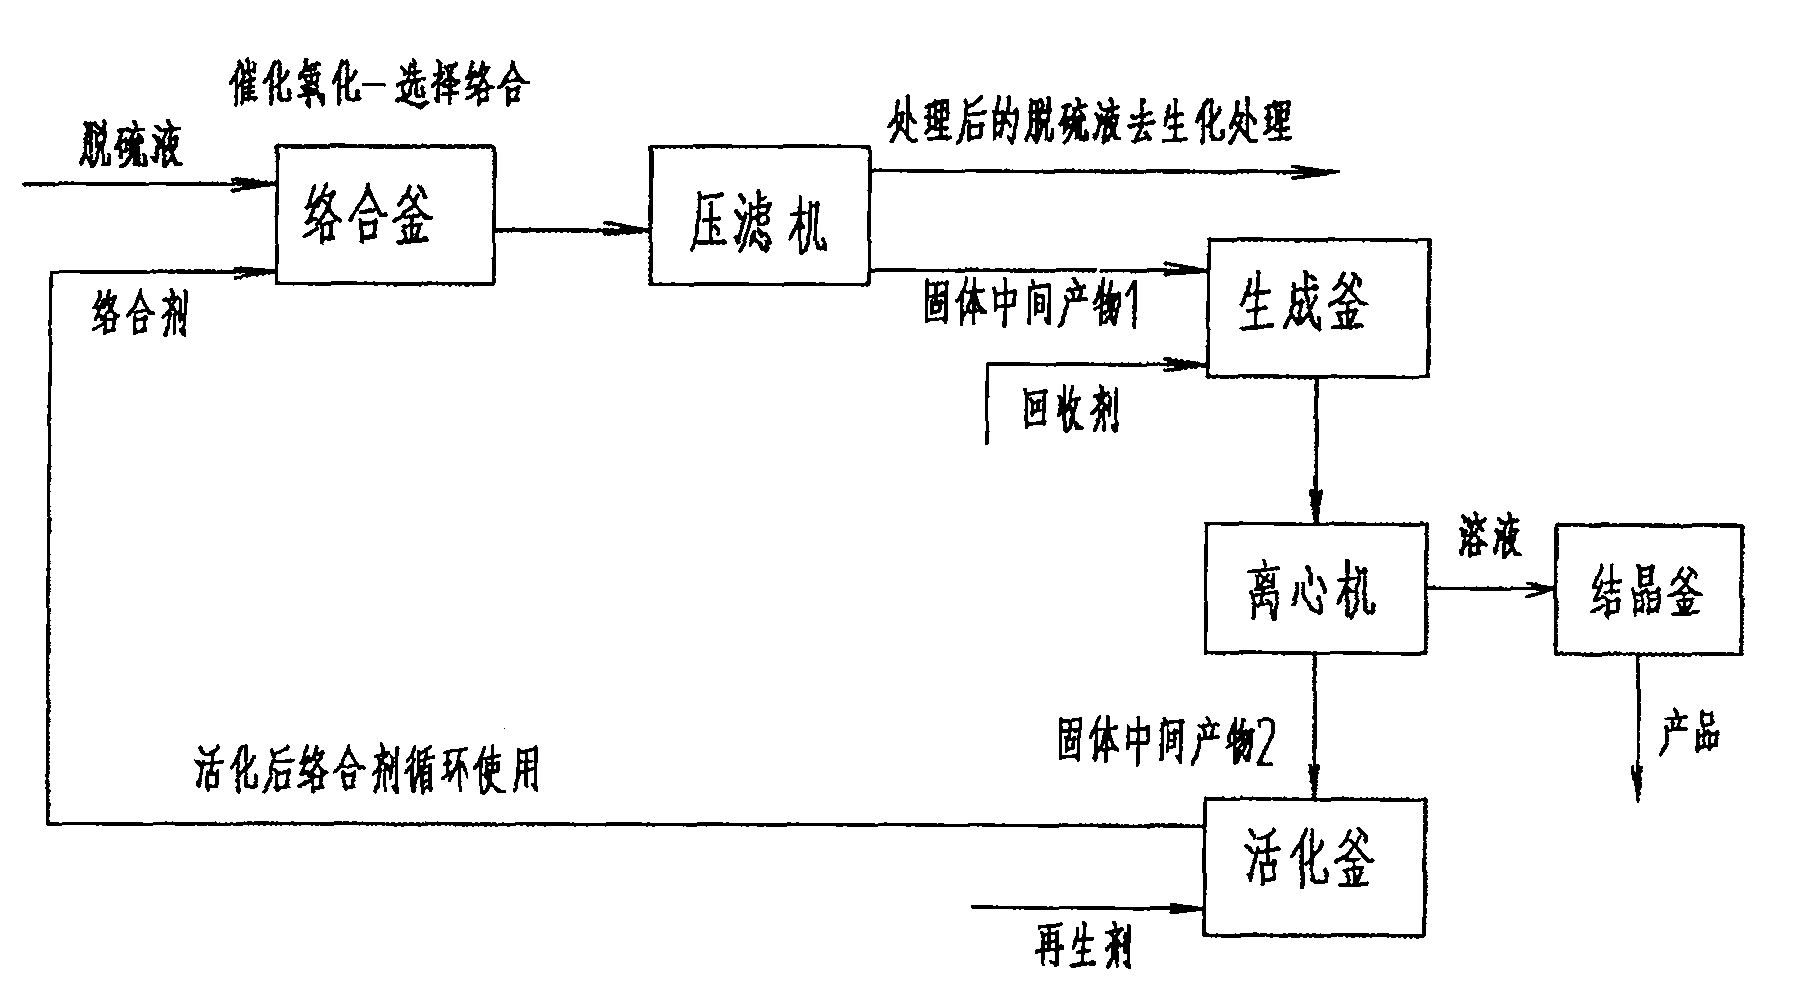 Process technique for discharged desulfurization solutions of HPF desulfurization system of coke-oven plant